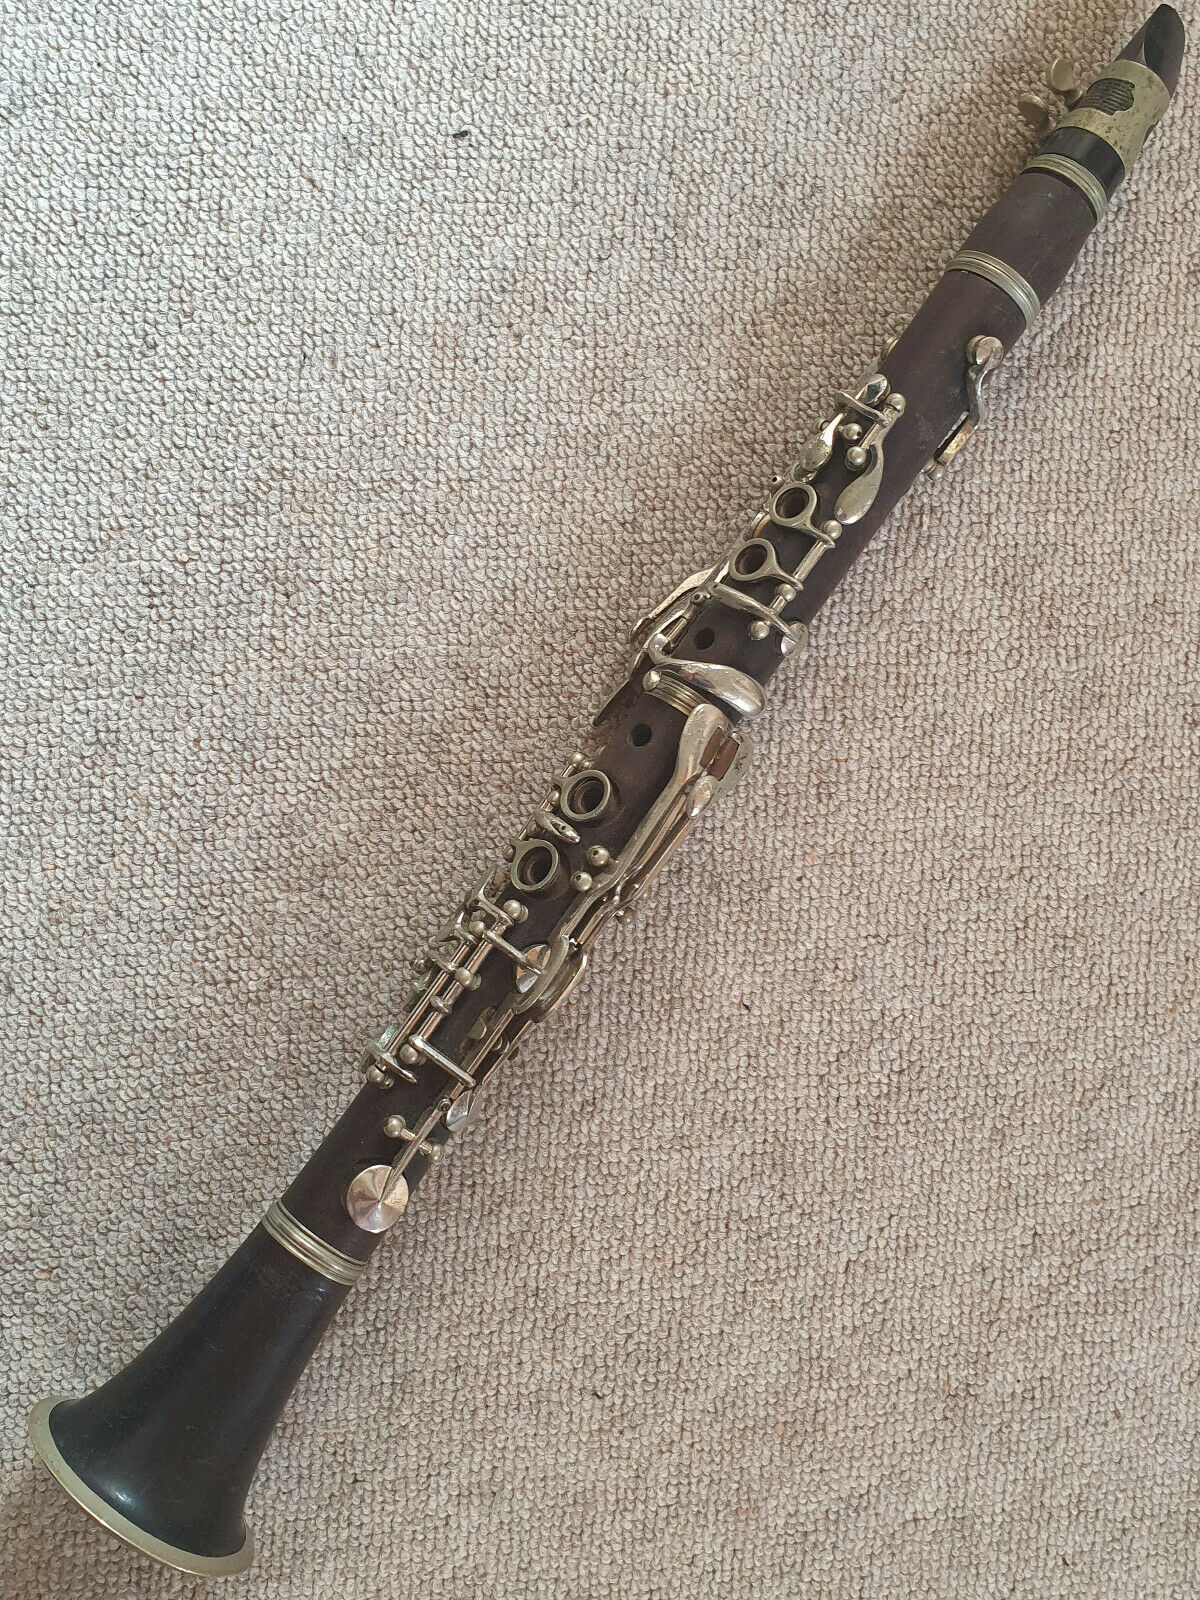 Old Wooden Eb (?) Clarinet With 4 Rings